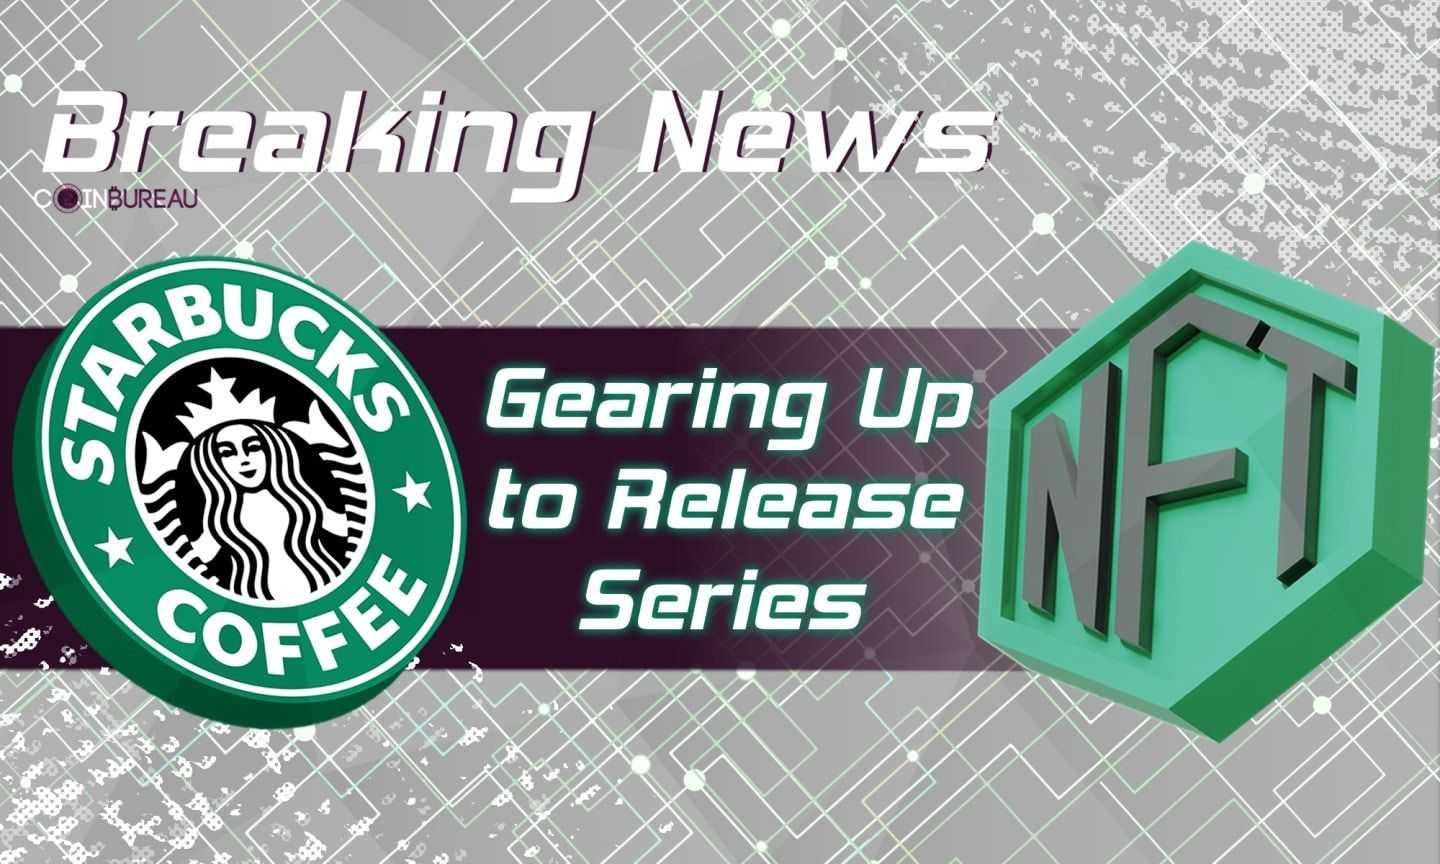 Starbucks Says It’s Gearing Up to Release NFT Series